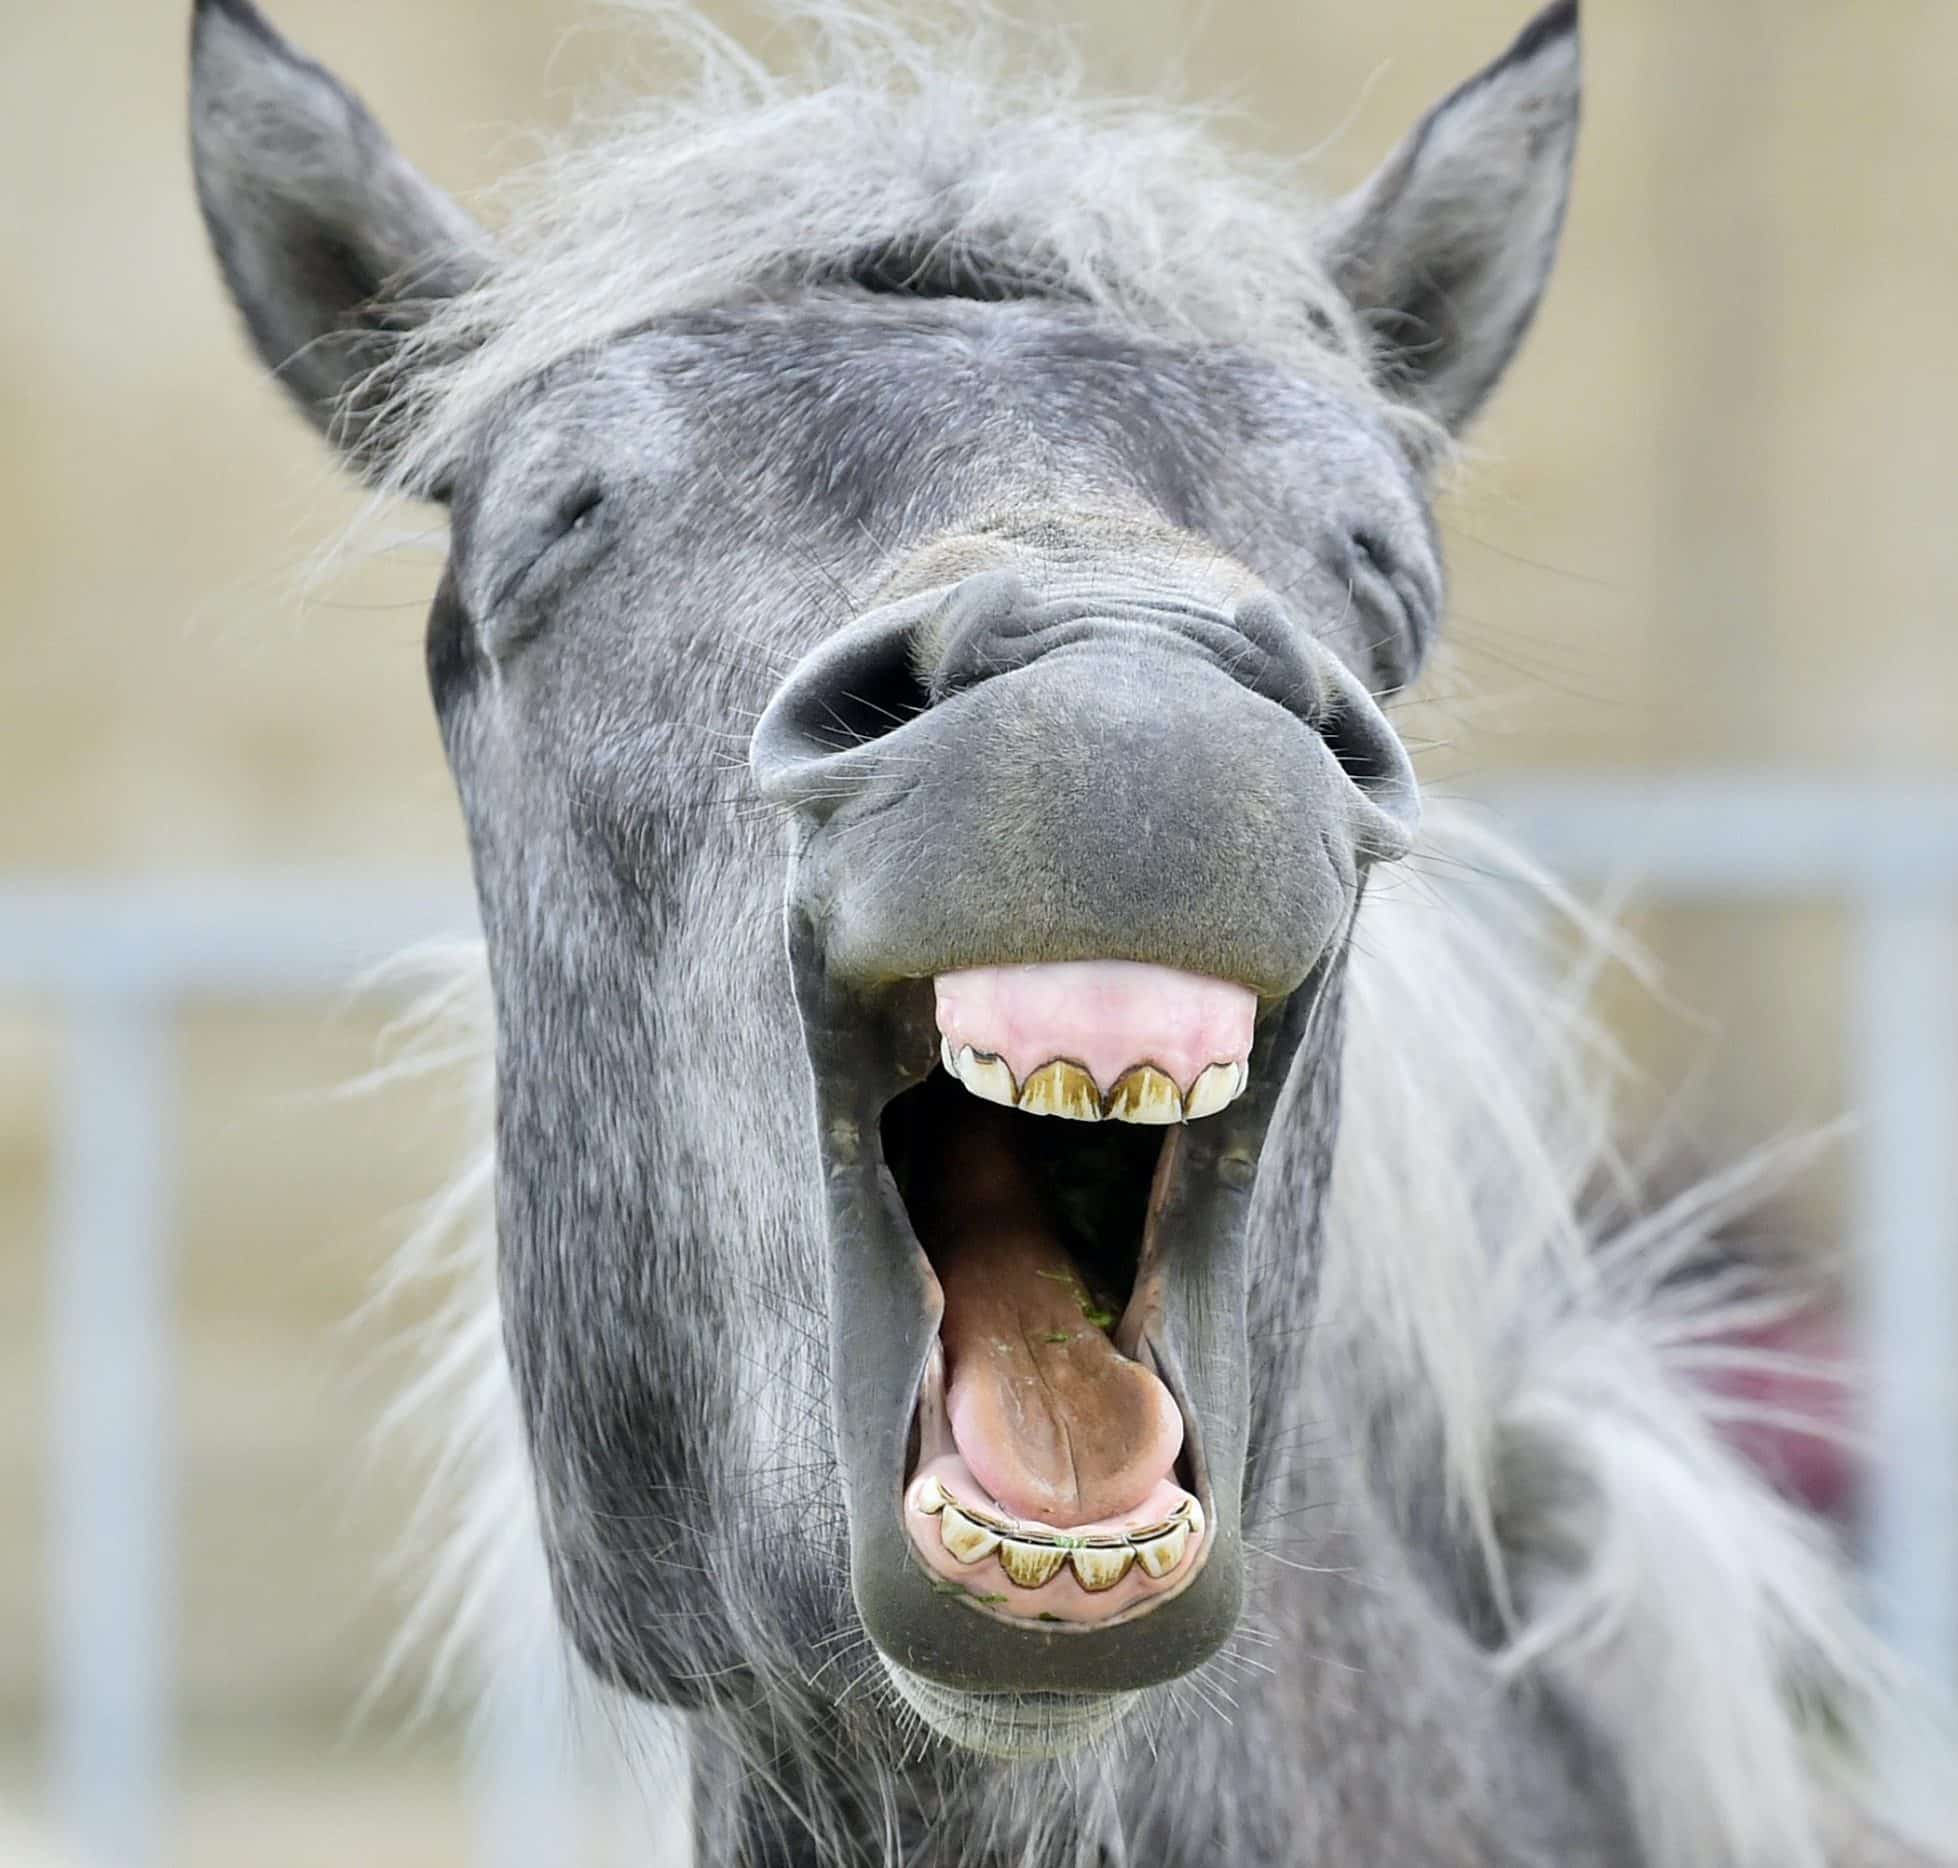 Funny portrait of a laughing horse. Camargue horse yawning, looking like he is laughing.